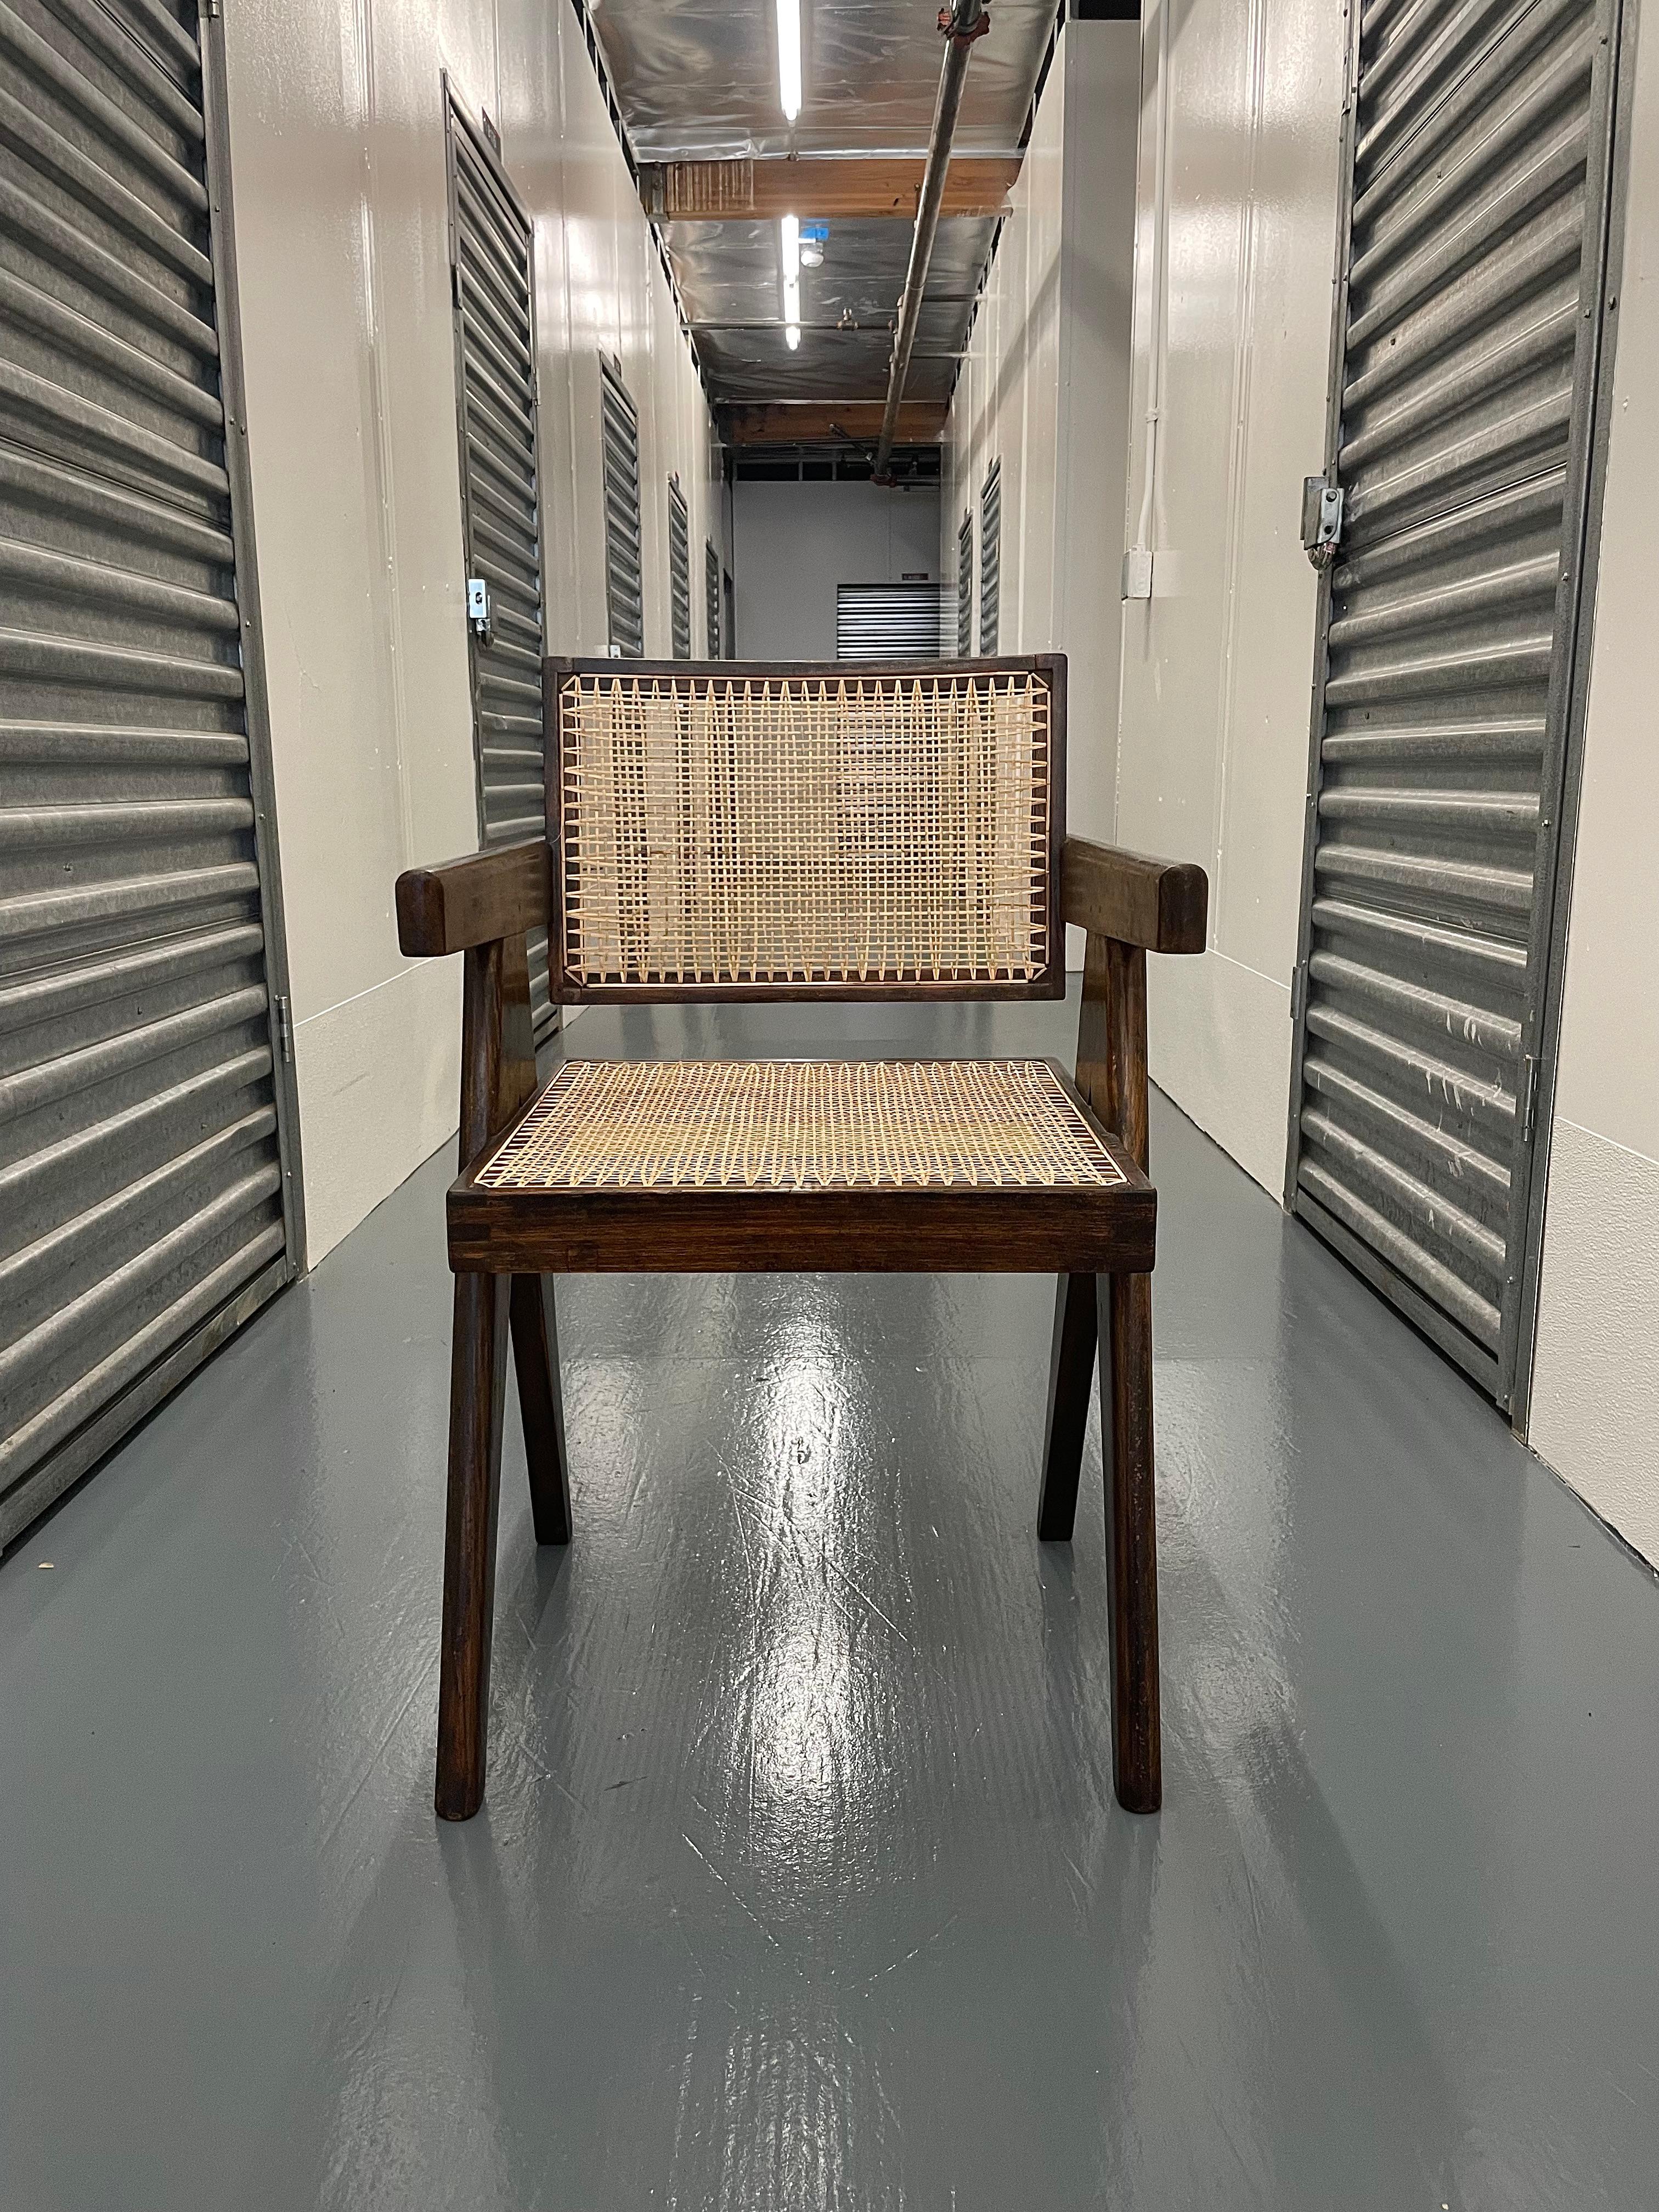 Numbered Pierre Jeanneret Model Pj-Si-28-A Floating Back Office Chair, 1950s, Chandigarh, India.

Period: Mid Twentieth Century
Designer: Pierre Jeanneret
Model: PJ-SI-28-A
Style: Floating Back Office Chair
Origin: India, Chandigarh
Quantity: